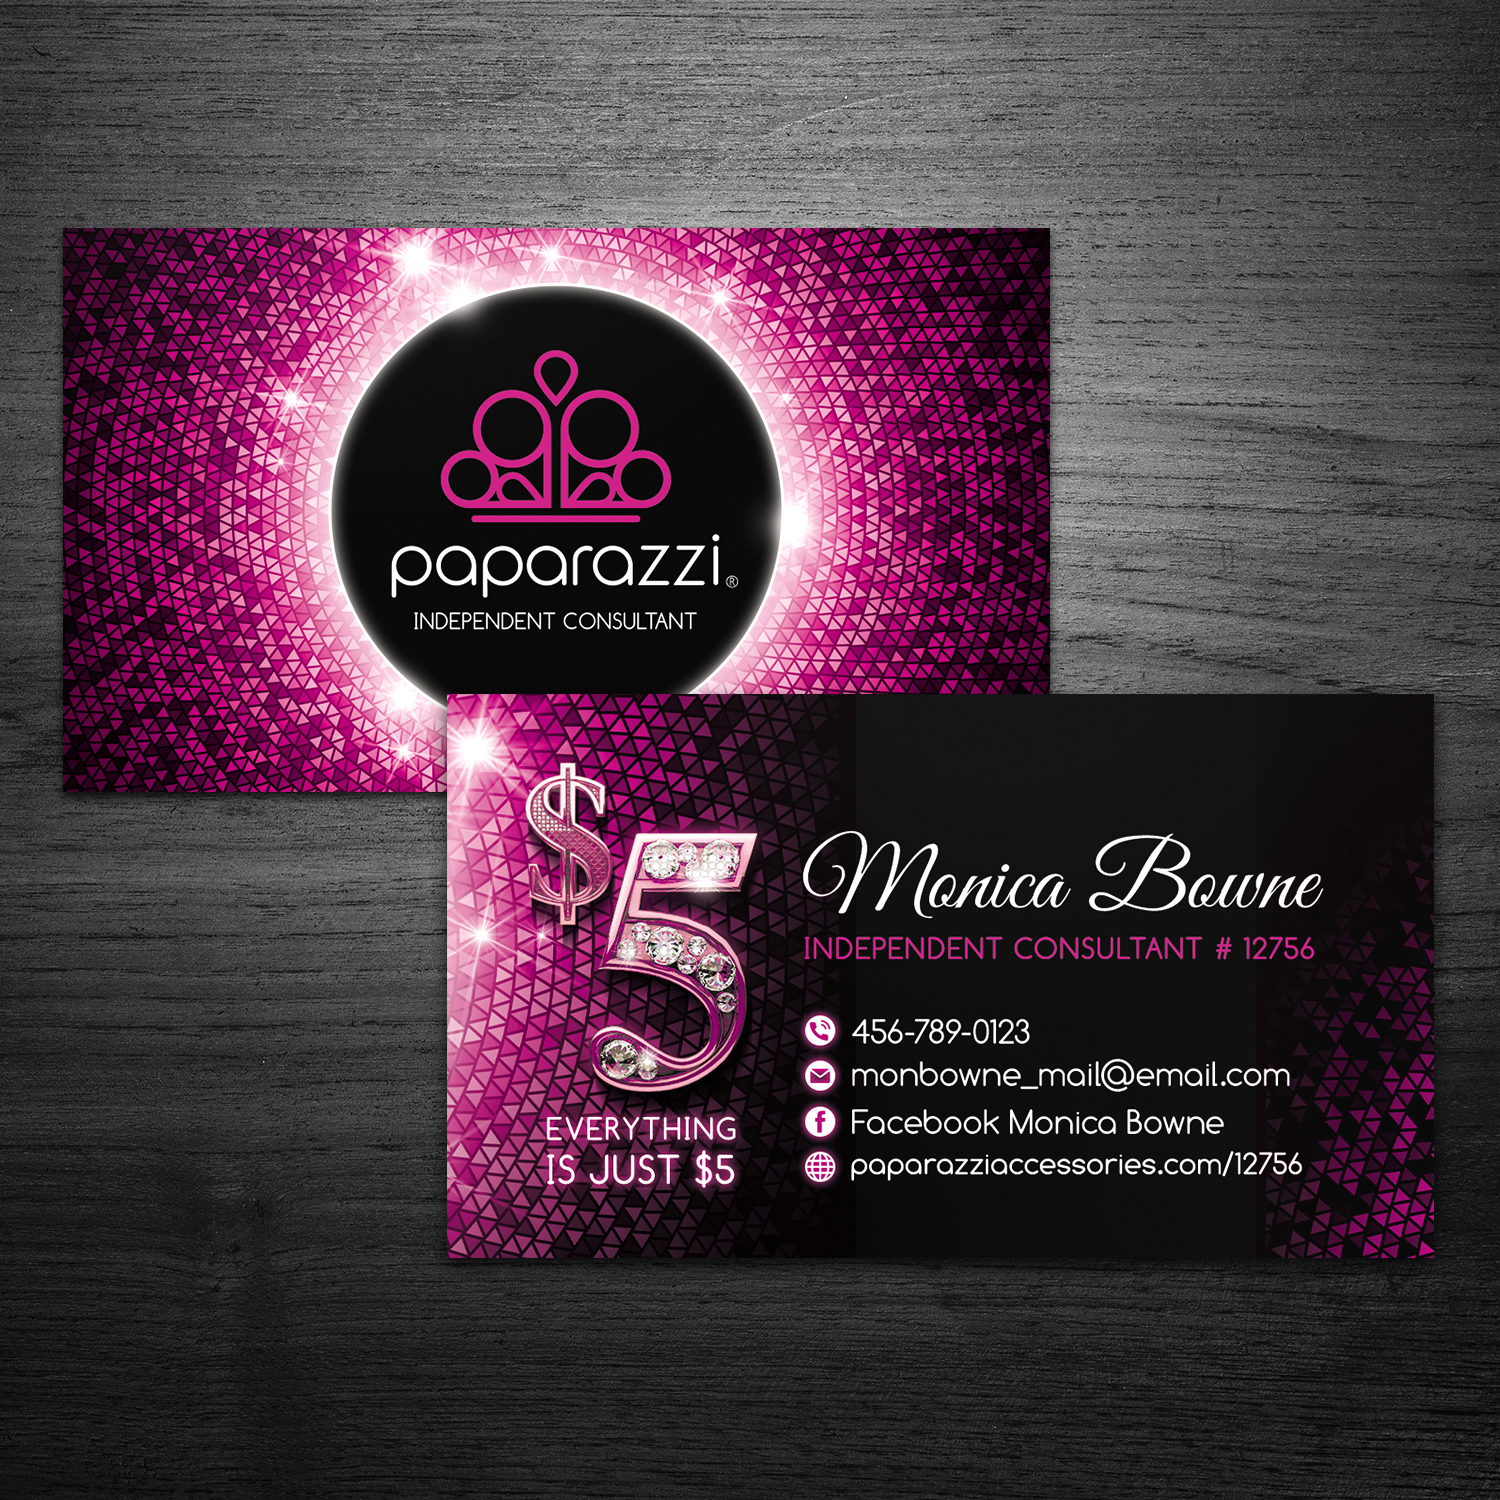 Paparazzi Business Card 2.2 For Paparazzi Accessories business